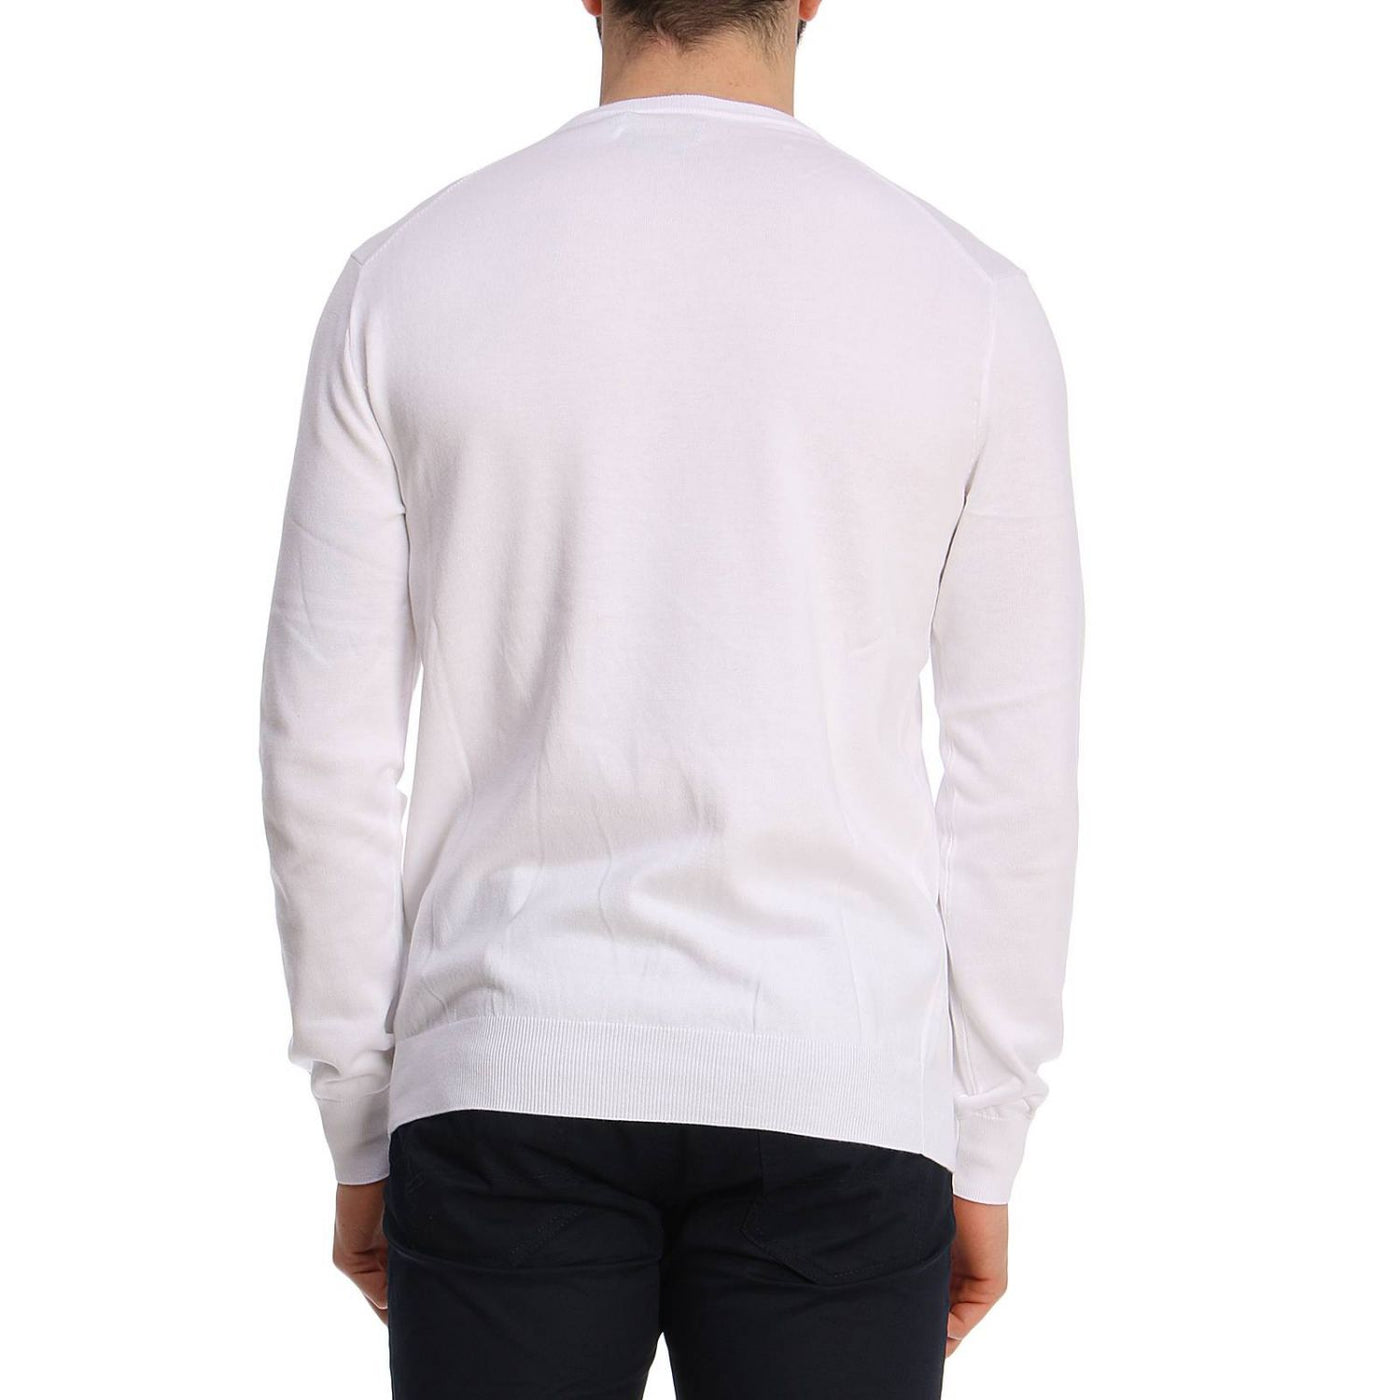 Men's sweater with stretch micro-ribbed crew neck